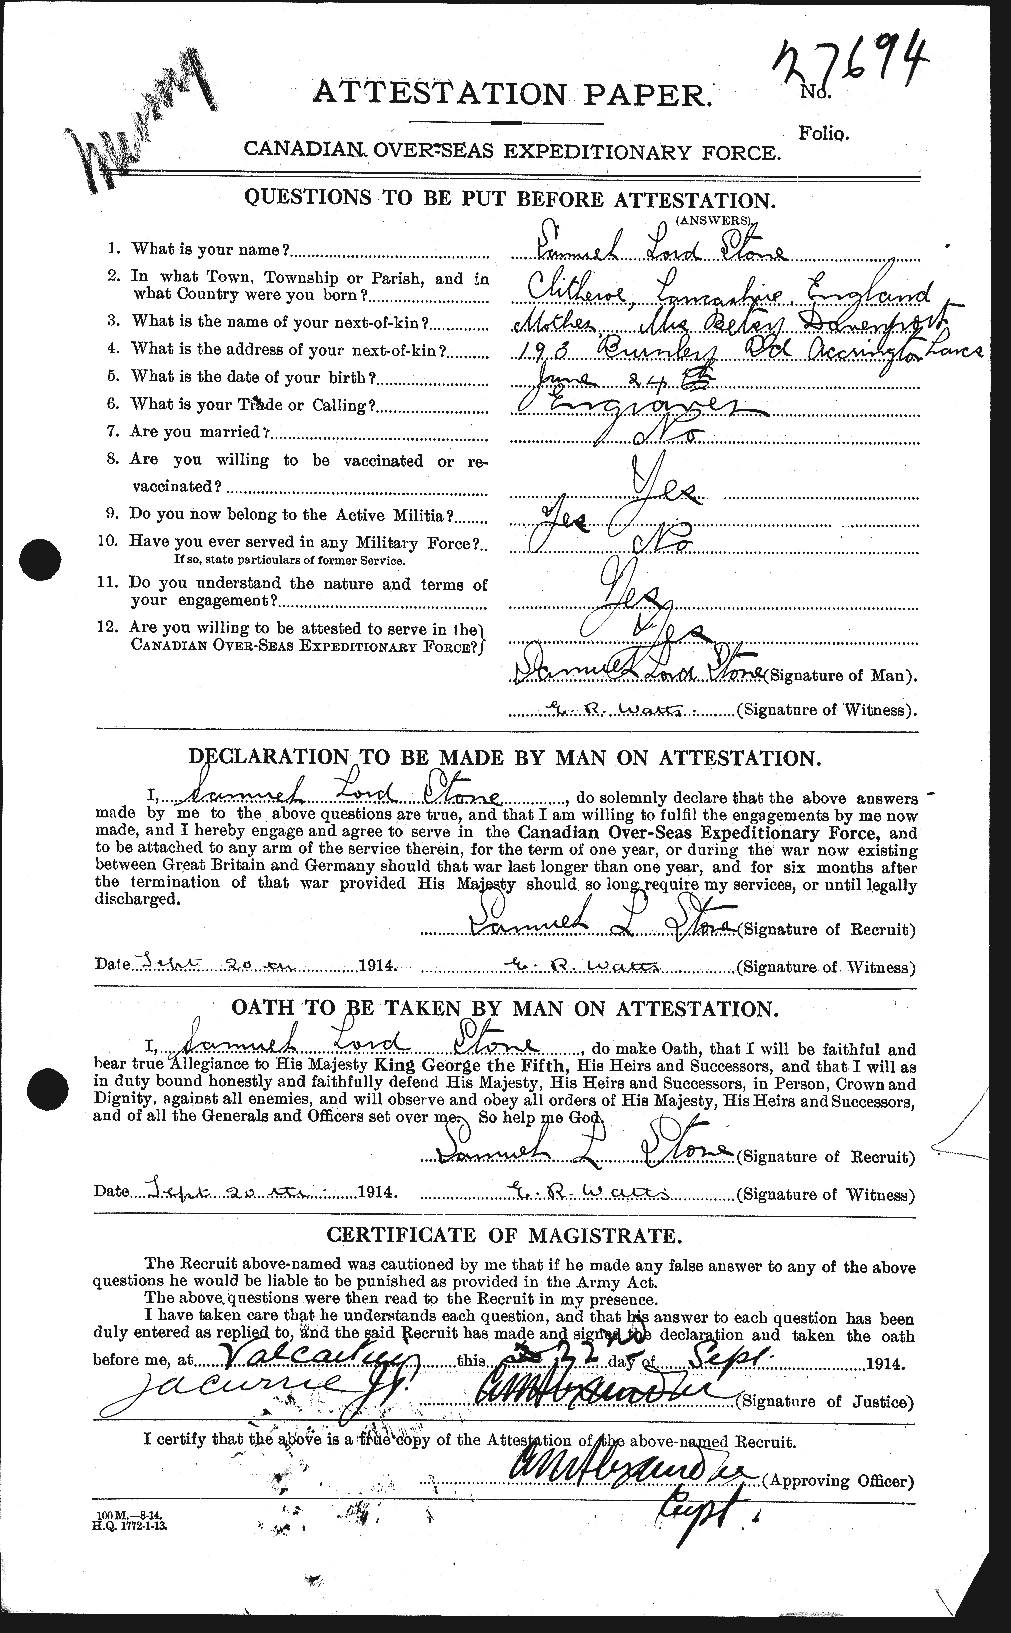 Personnel Records of the First World War - CEF 121865a